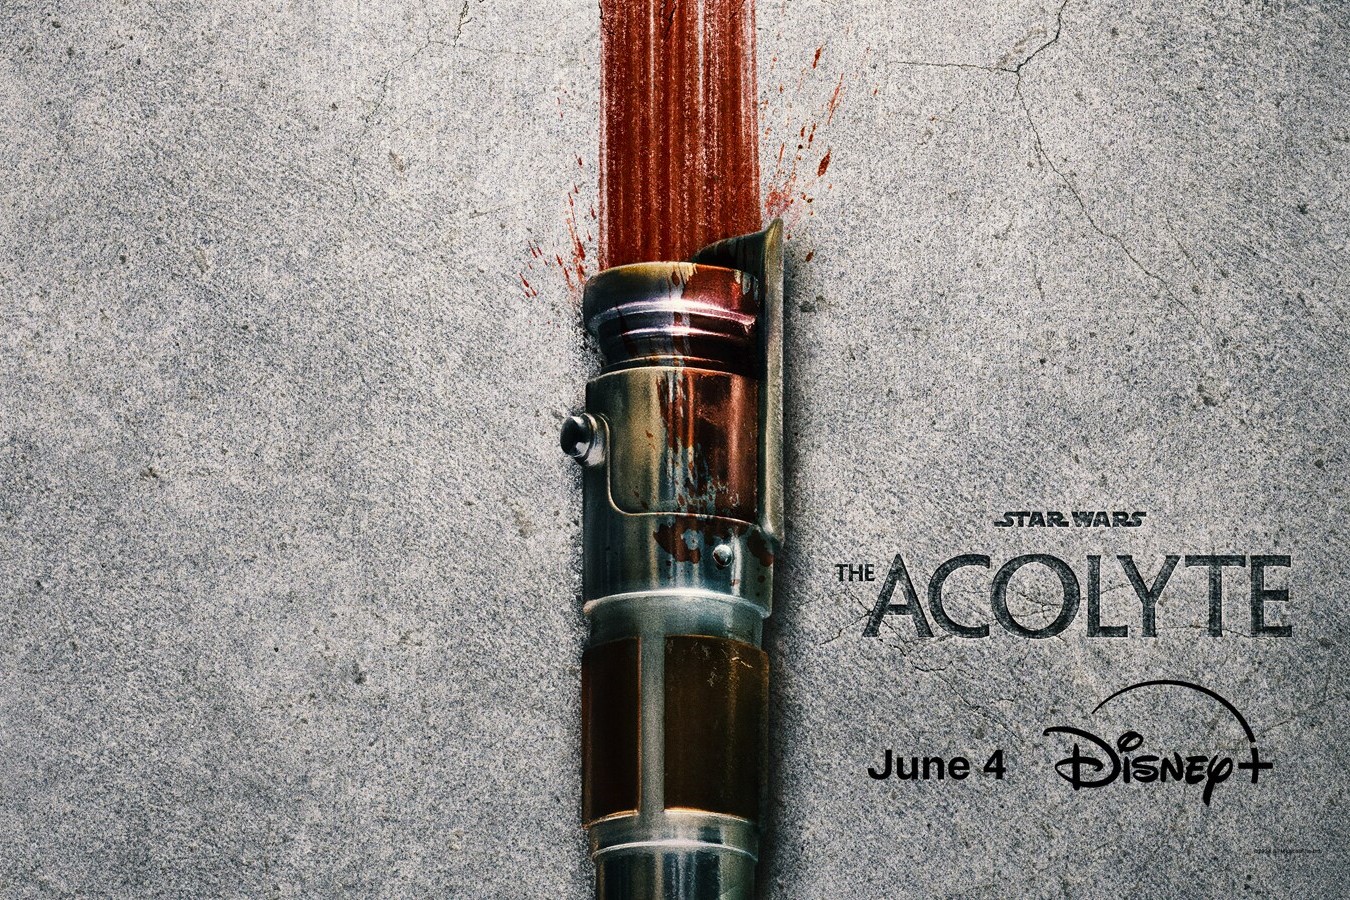 Star Wars: The Acolyte Official Trailer by Disney+